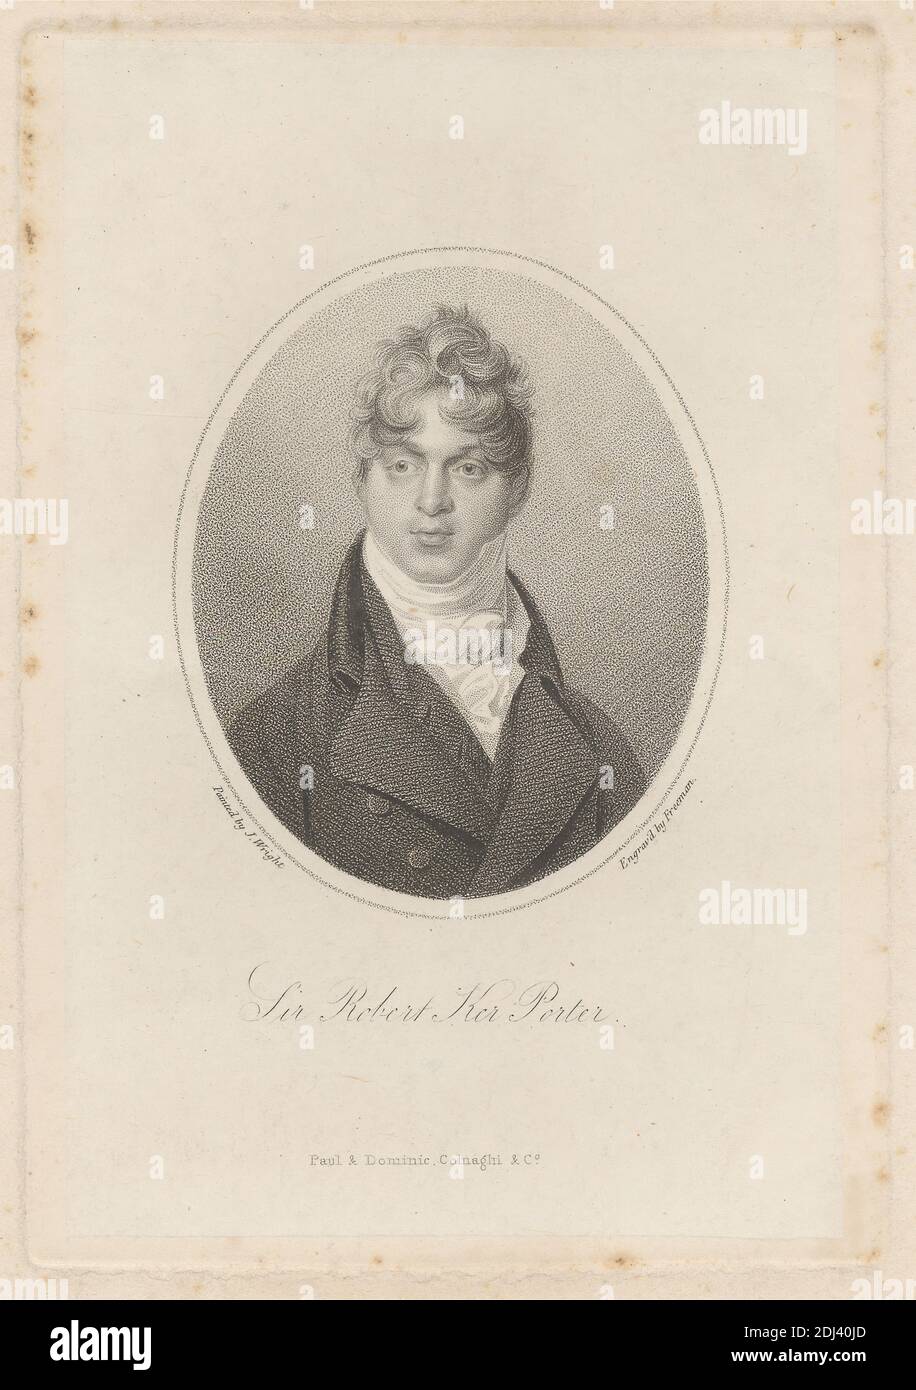 Sir Robert Ker Porter, Print made by Samuel Freeman, 1773–1857, British, after John Wright, active 1812, Published by Paul and Dominic Colnaghi & Co, established 1760, active ca. 1785–1911, Italian, active in Britain, undated, Stipple engraving and etching on moderatley thick, slightly textured, cream wove paper with cream chine collé, Sheet: 11 7/8 x 8 5/8 inches (30.1 x 21.9 cm), Plate: 6 9/16 x 4 1/2 inches (16.6 x 11.5 cm), Sheet: 6 1/4 x 4 1/8 inches (15.8 x 10.4 cm), and Image: 3 9/16 x 2 15/16 inches (9 x 7.4 cm), collar, cravat, curls, diplomat, gaze, painter, portrait, posing, writer Stock Photo